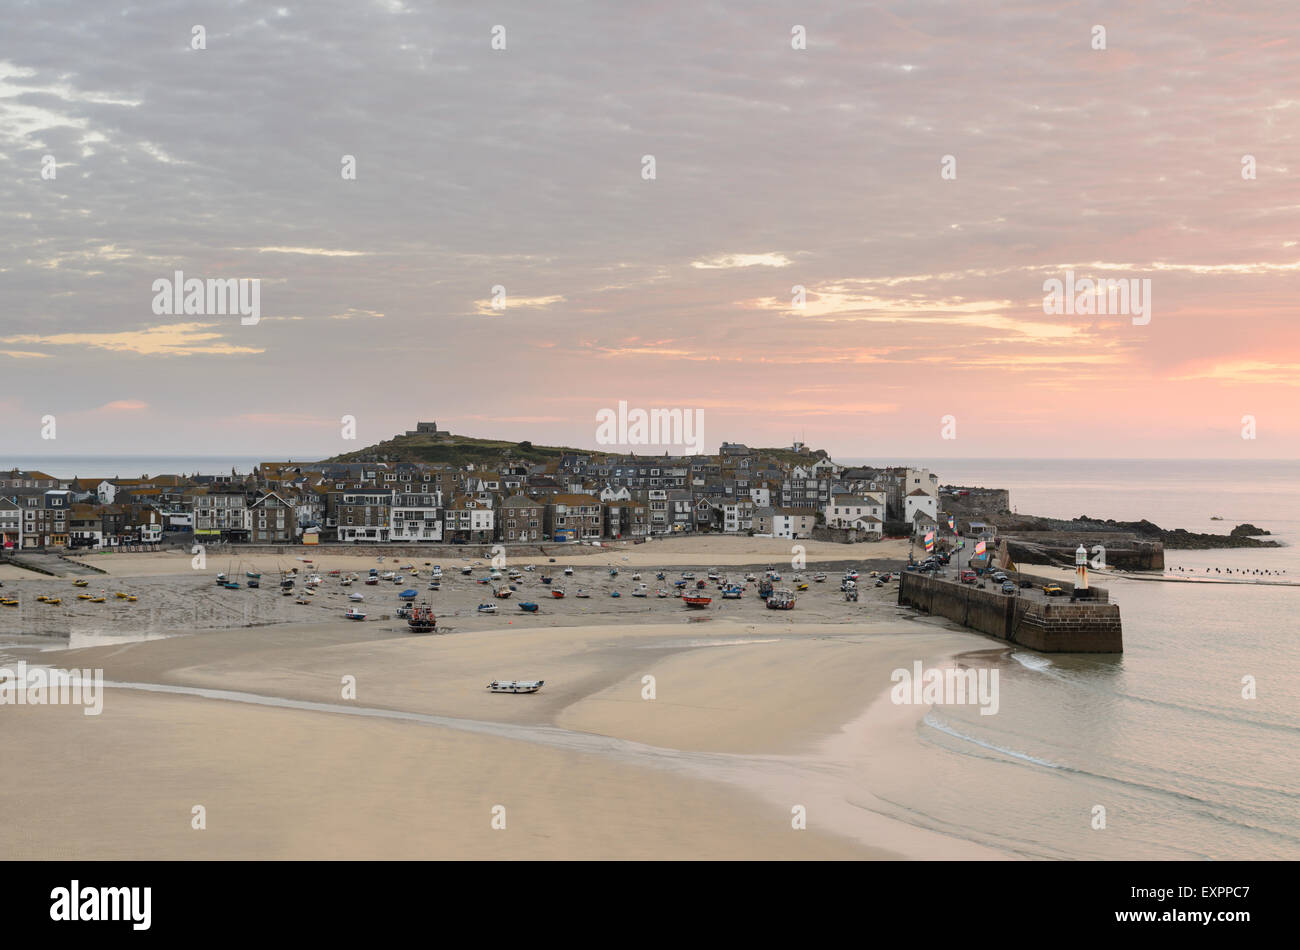 The view at sunrise of St Ives, Cornwall, England. A fishing town popular with artists and tourists on the North Cornish Coast. Stock Photo